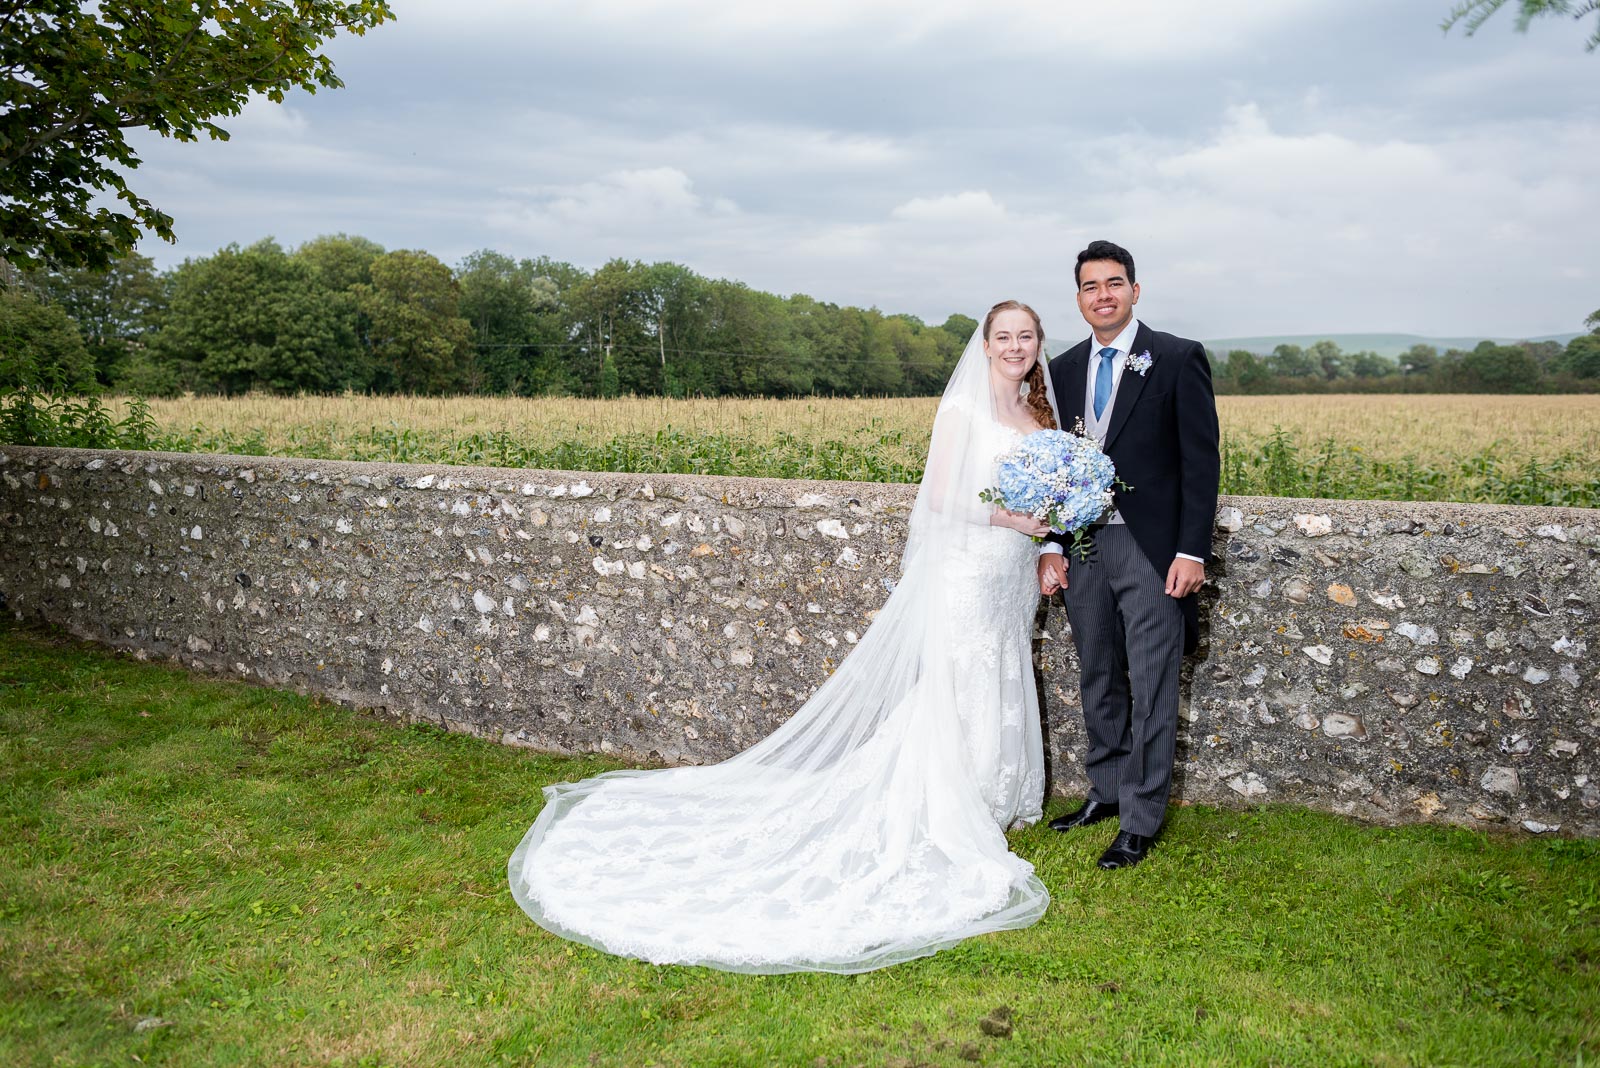 Wedding Photographer for Lily and Callum in Iford